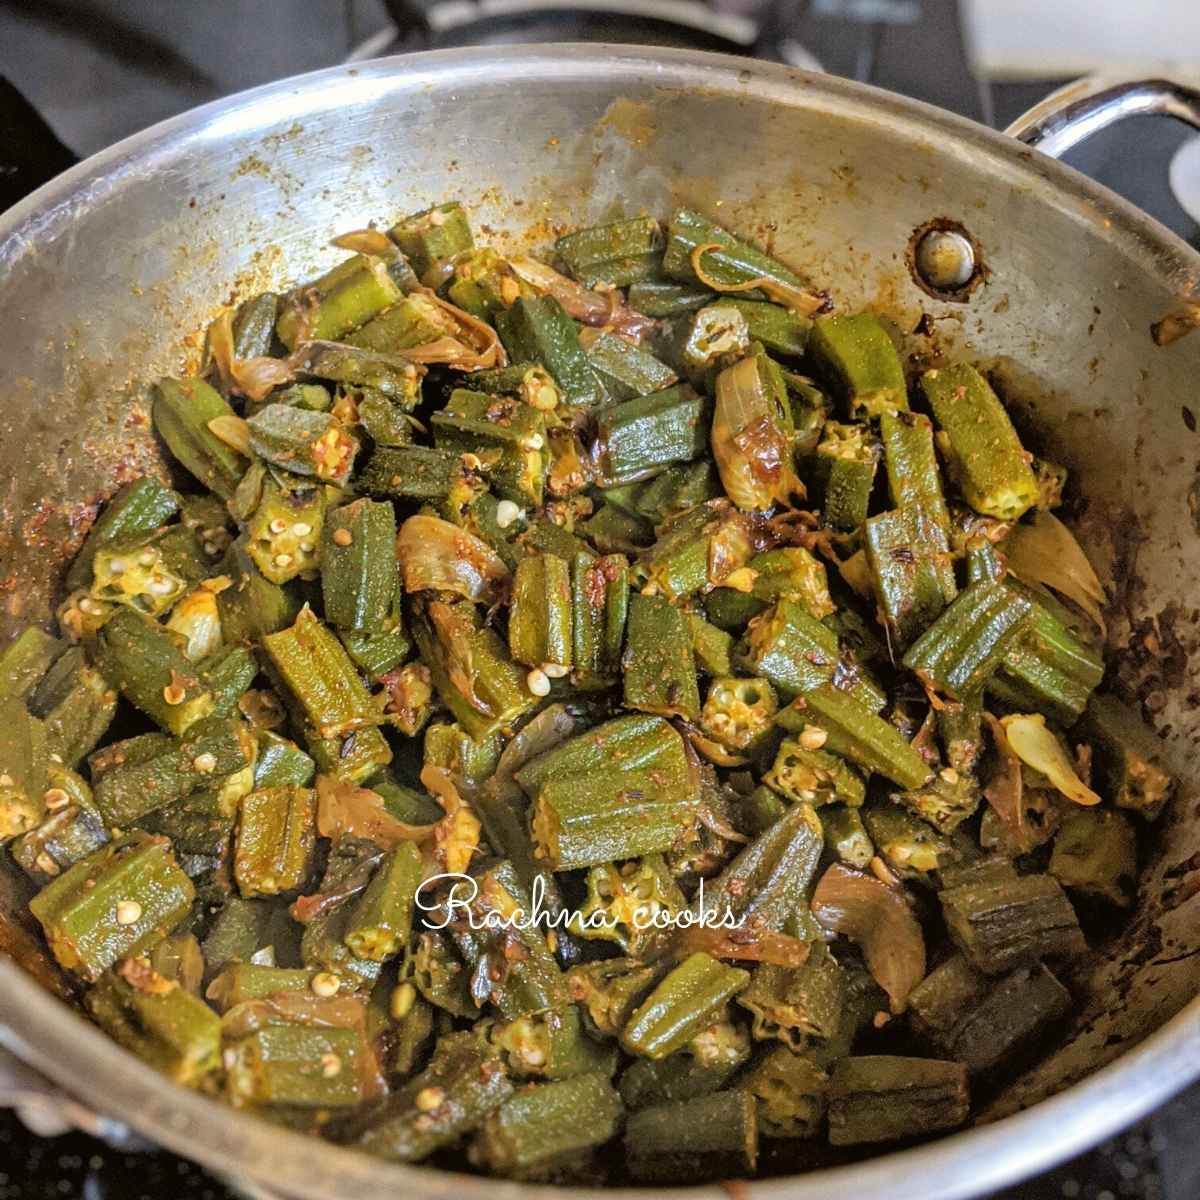 Cooked okra in a wok